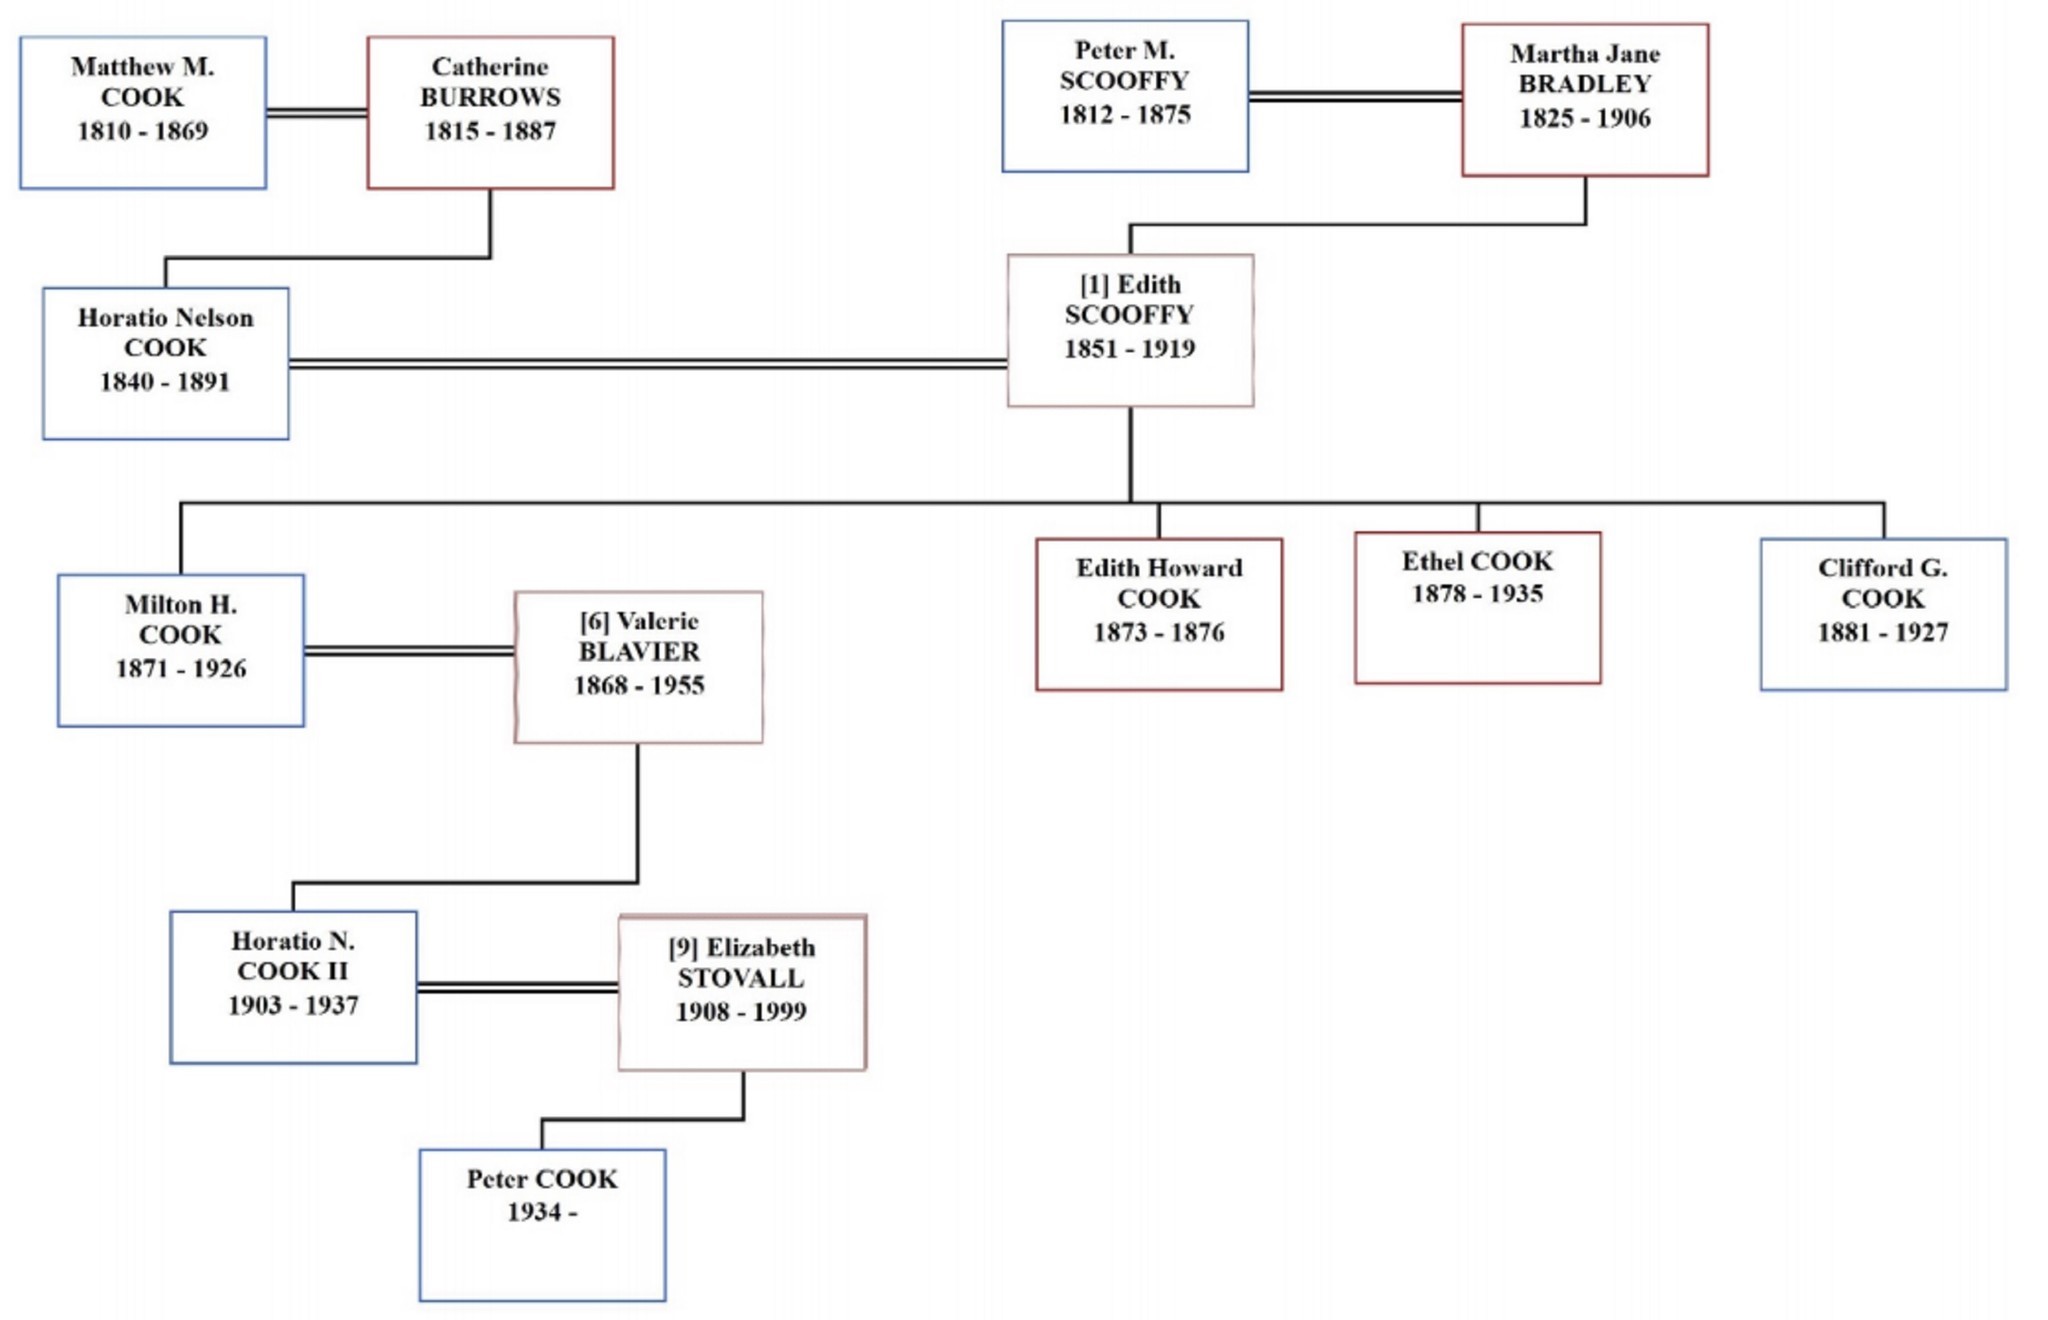 The family tree shows living descendant Peter Cook in relation to Edith Cook, a.k.a. "Miranda Eve."